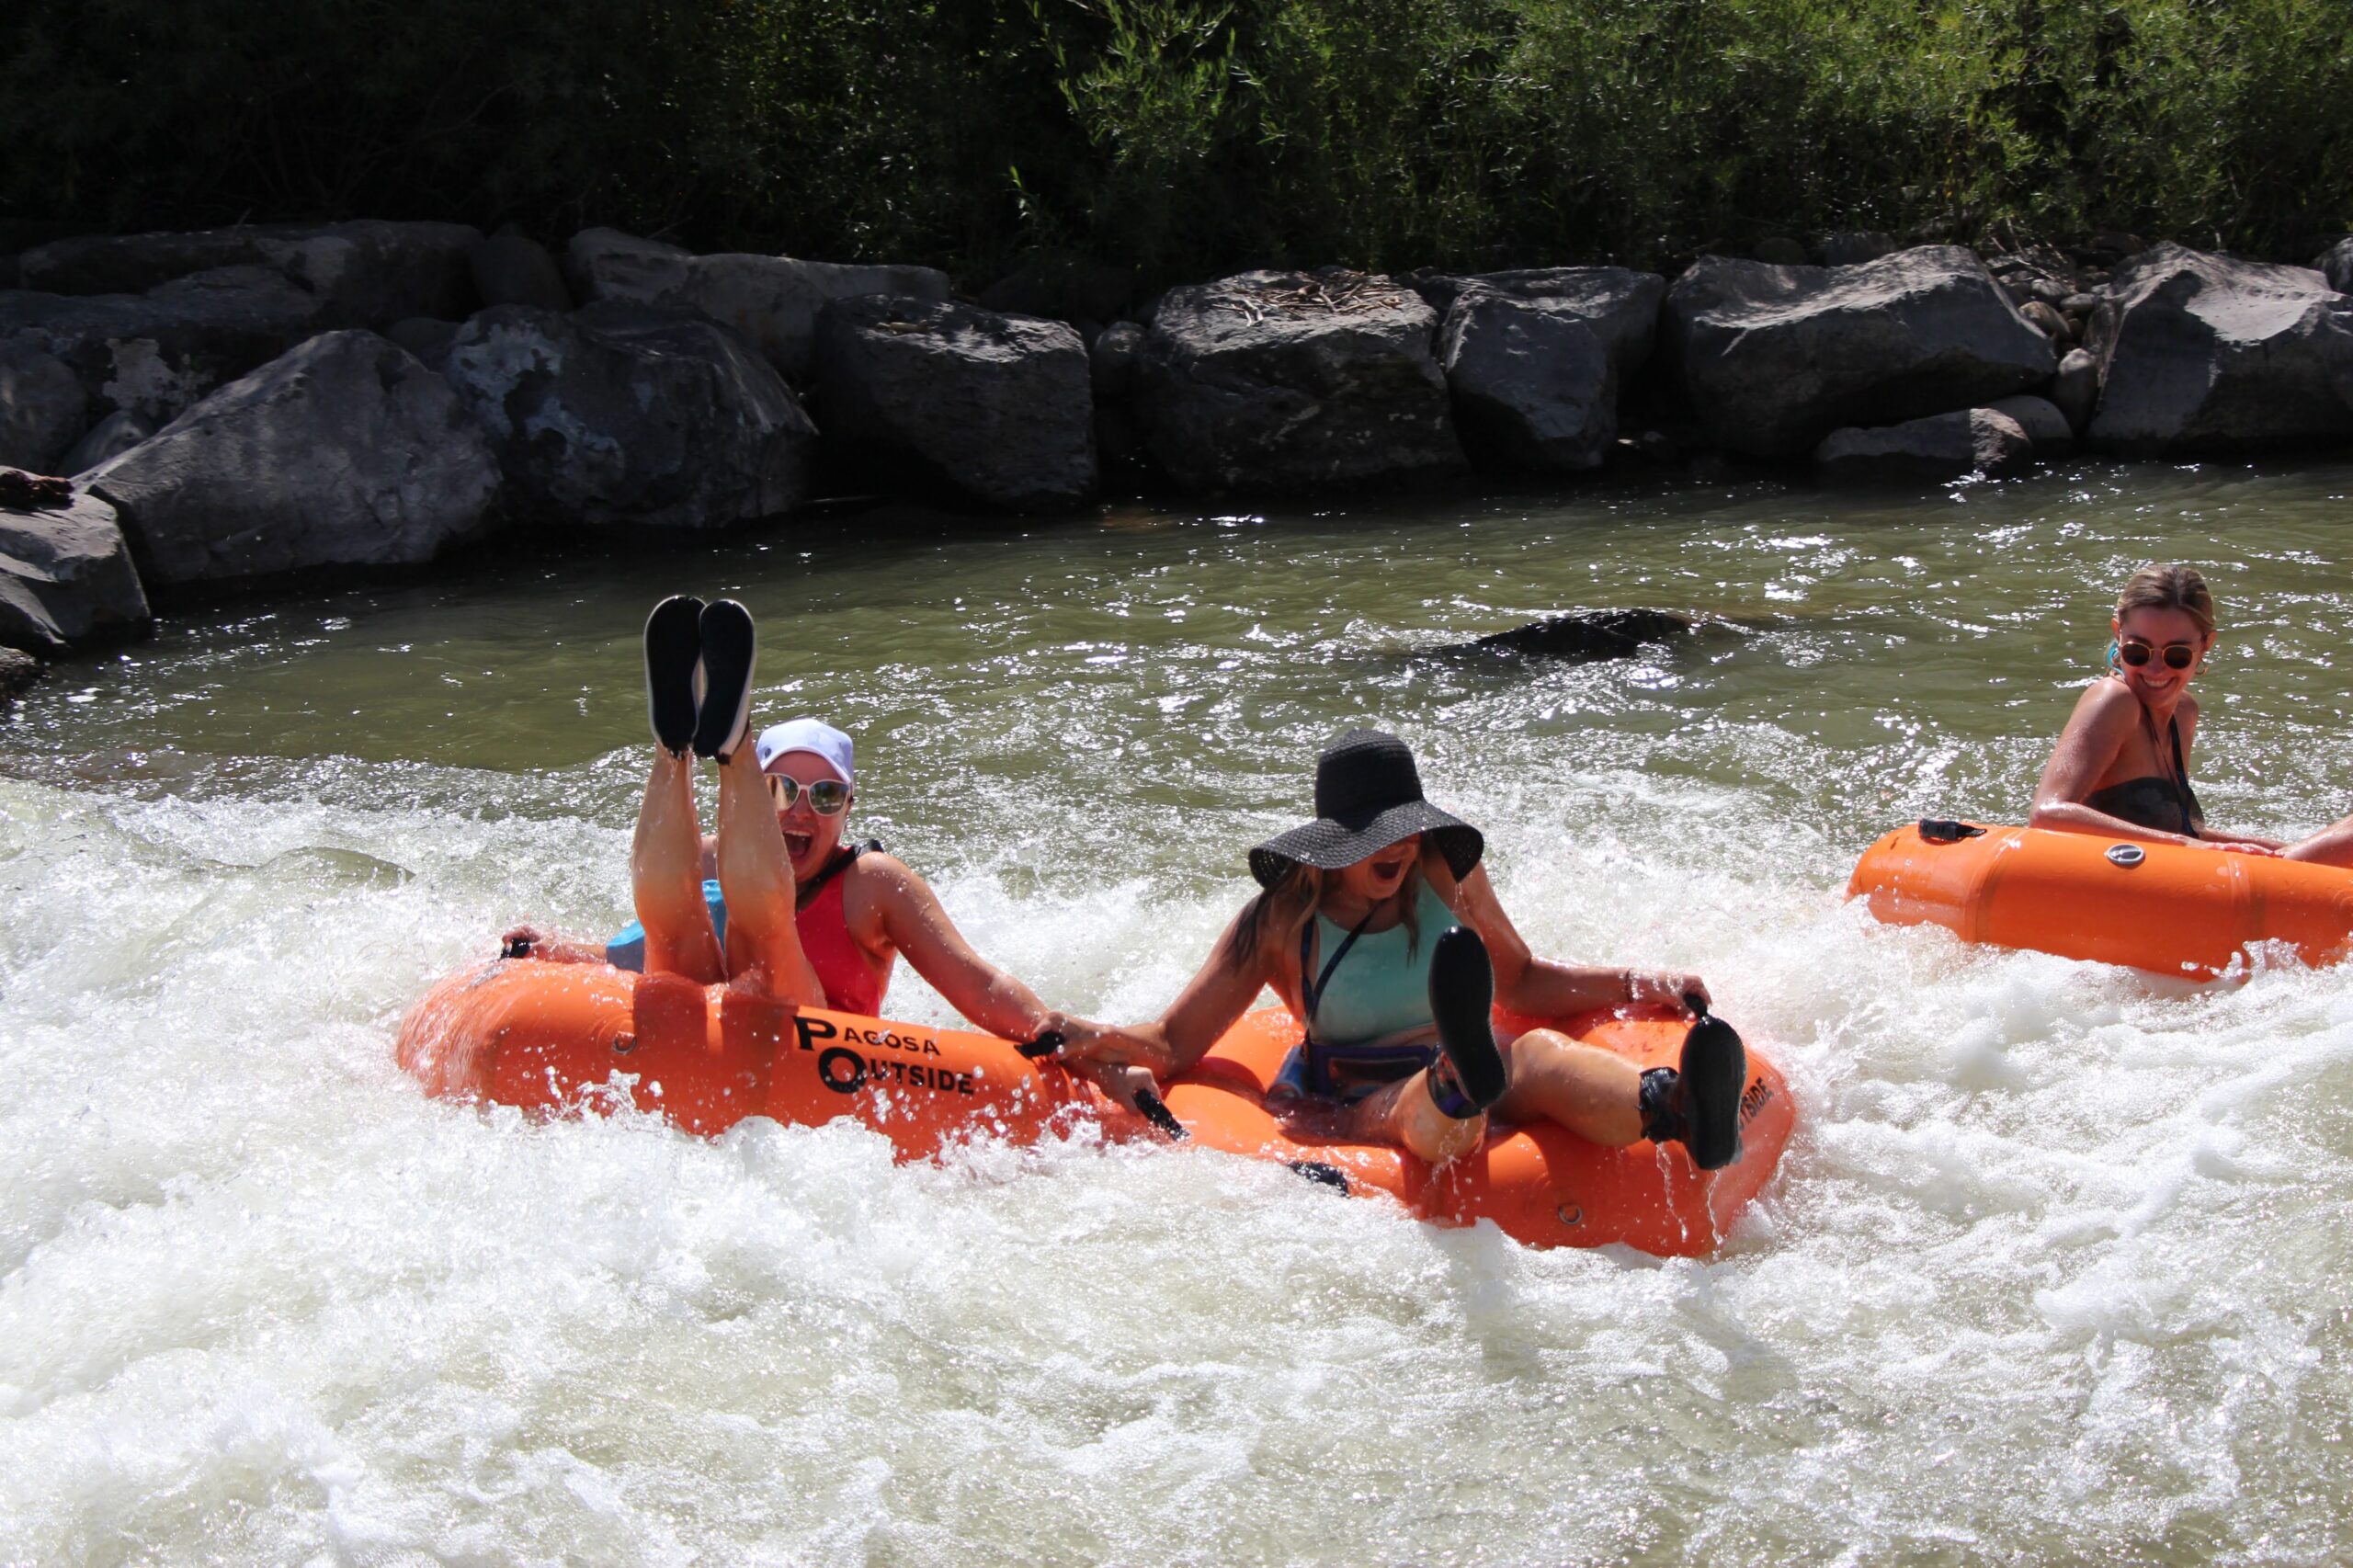 three women riding a wave on orange river tubes in the river